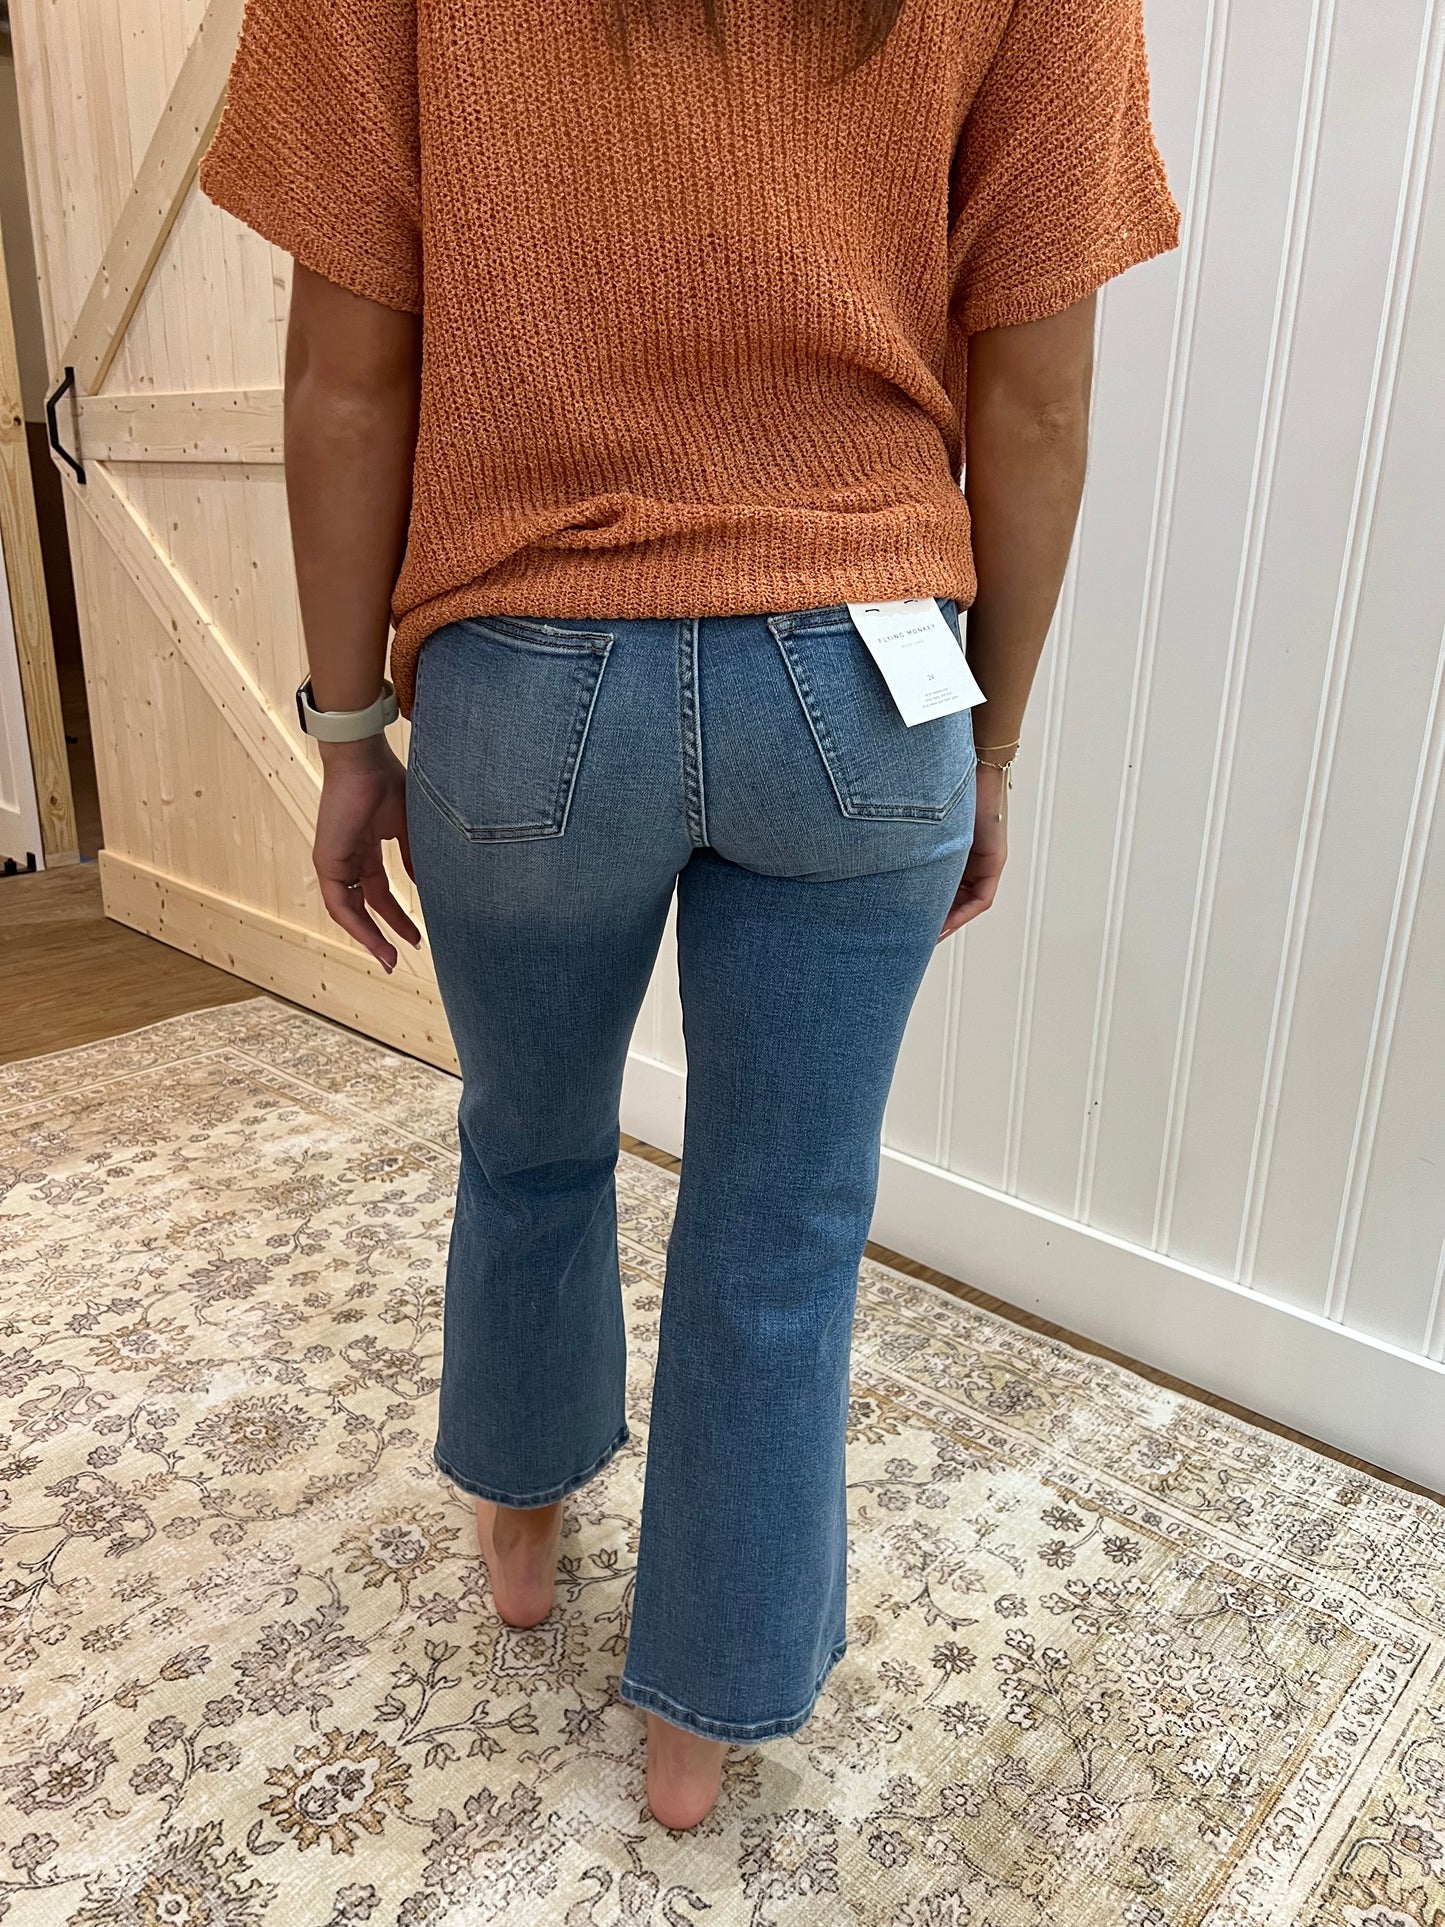 Take Notes - Cropped Jeans